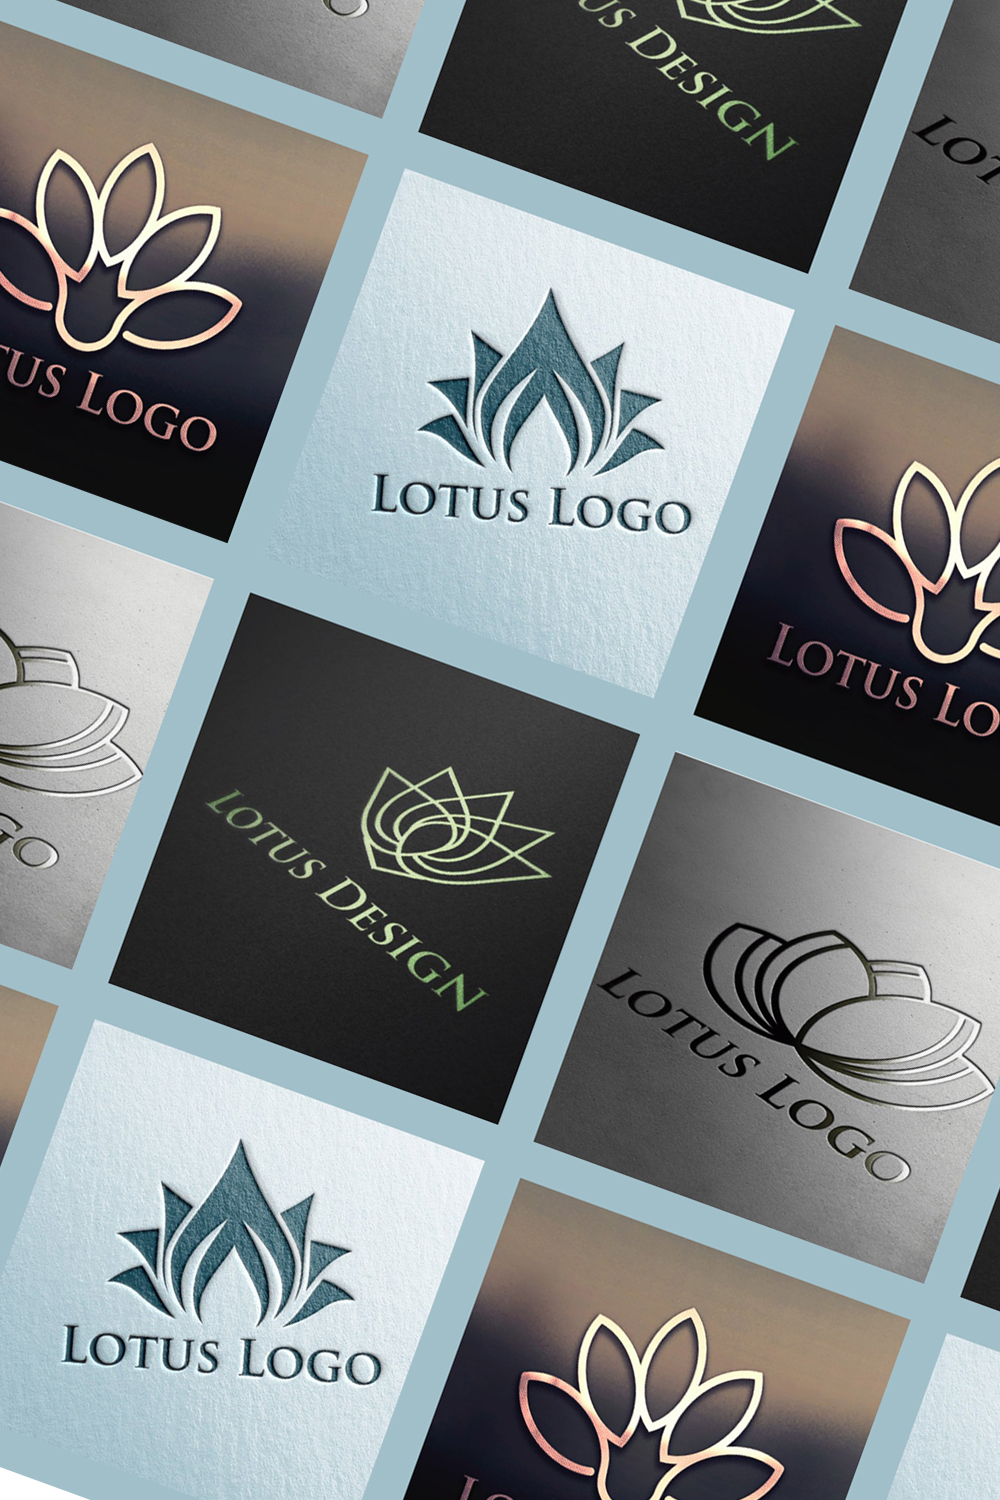 Bright logos with a lotus flower on multi-colored backgrounds in a box at an angle.